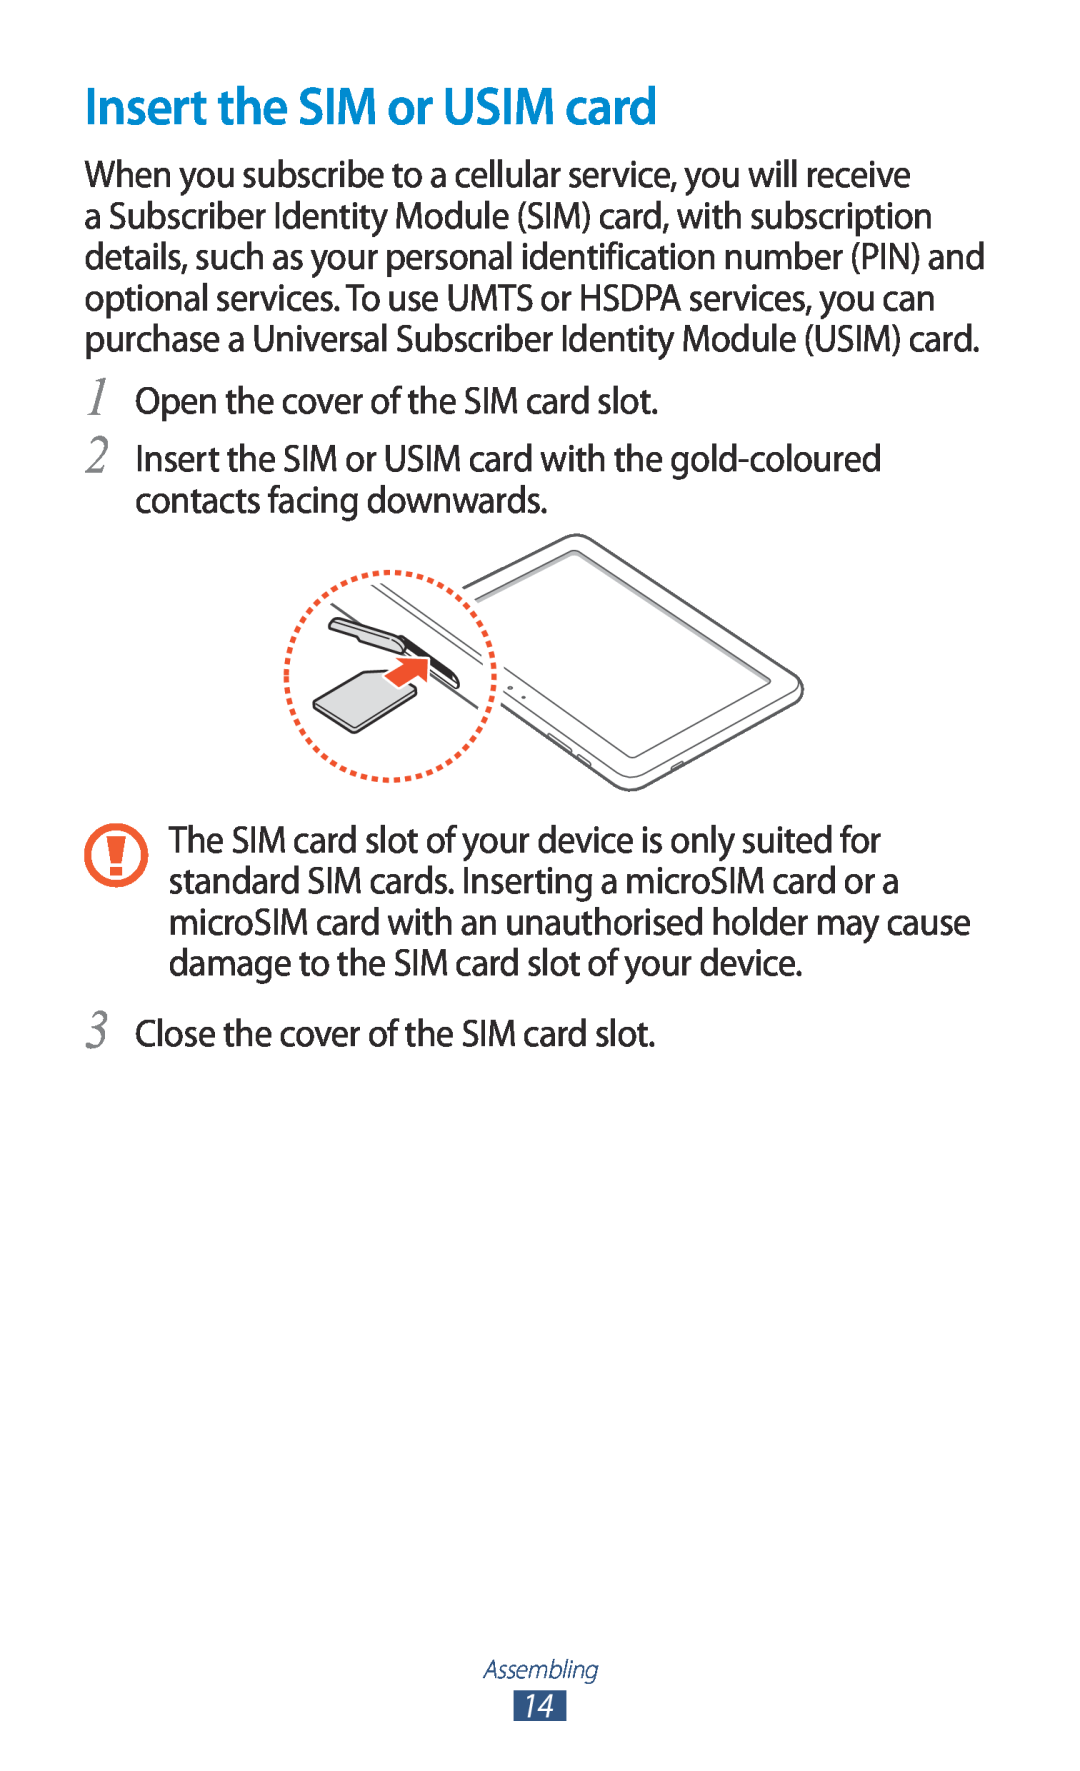 Samsung GT-P7500FKDATO, GT-P7500UWEDBT, GT-P7500FKAATO Insert the SIM or USIM card, Open the cover of the SIM card slot 